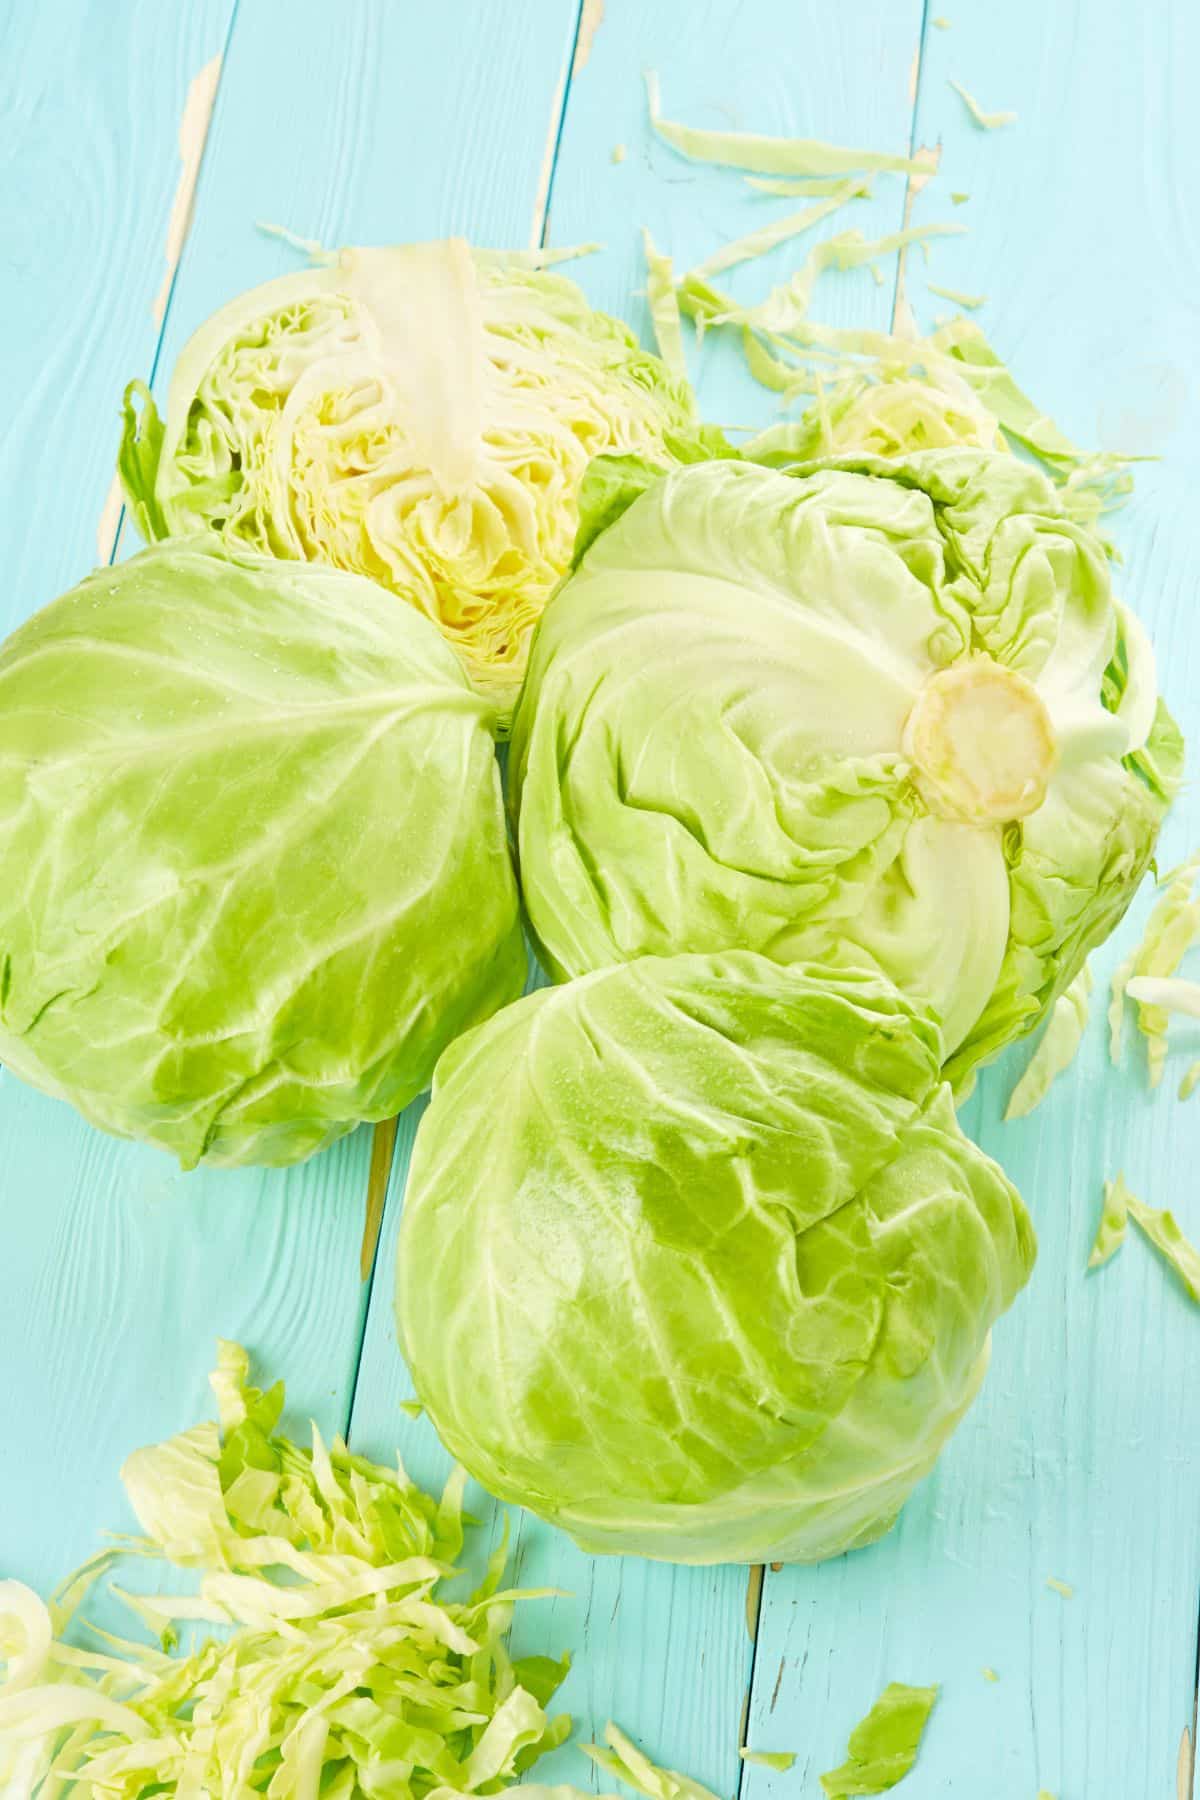 Halved and whole green cabbage on painted wooden surface.